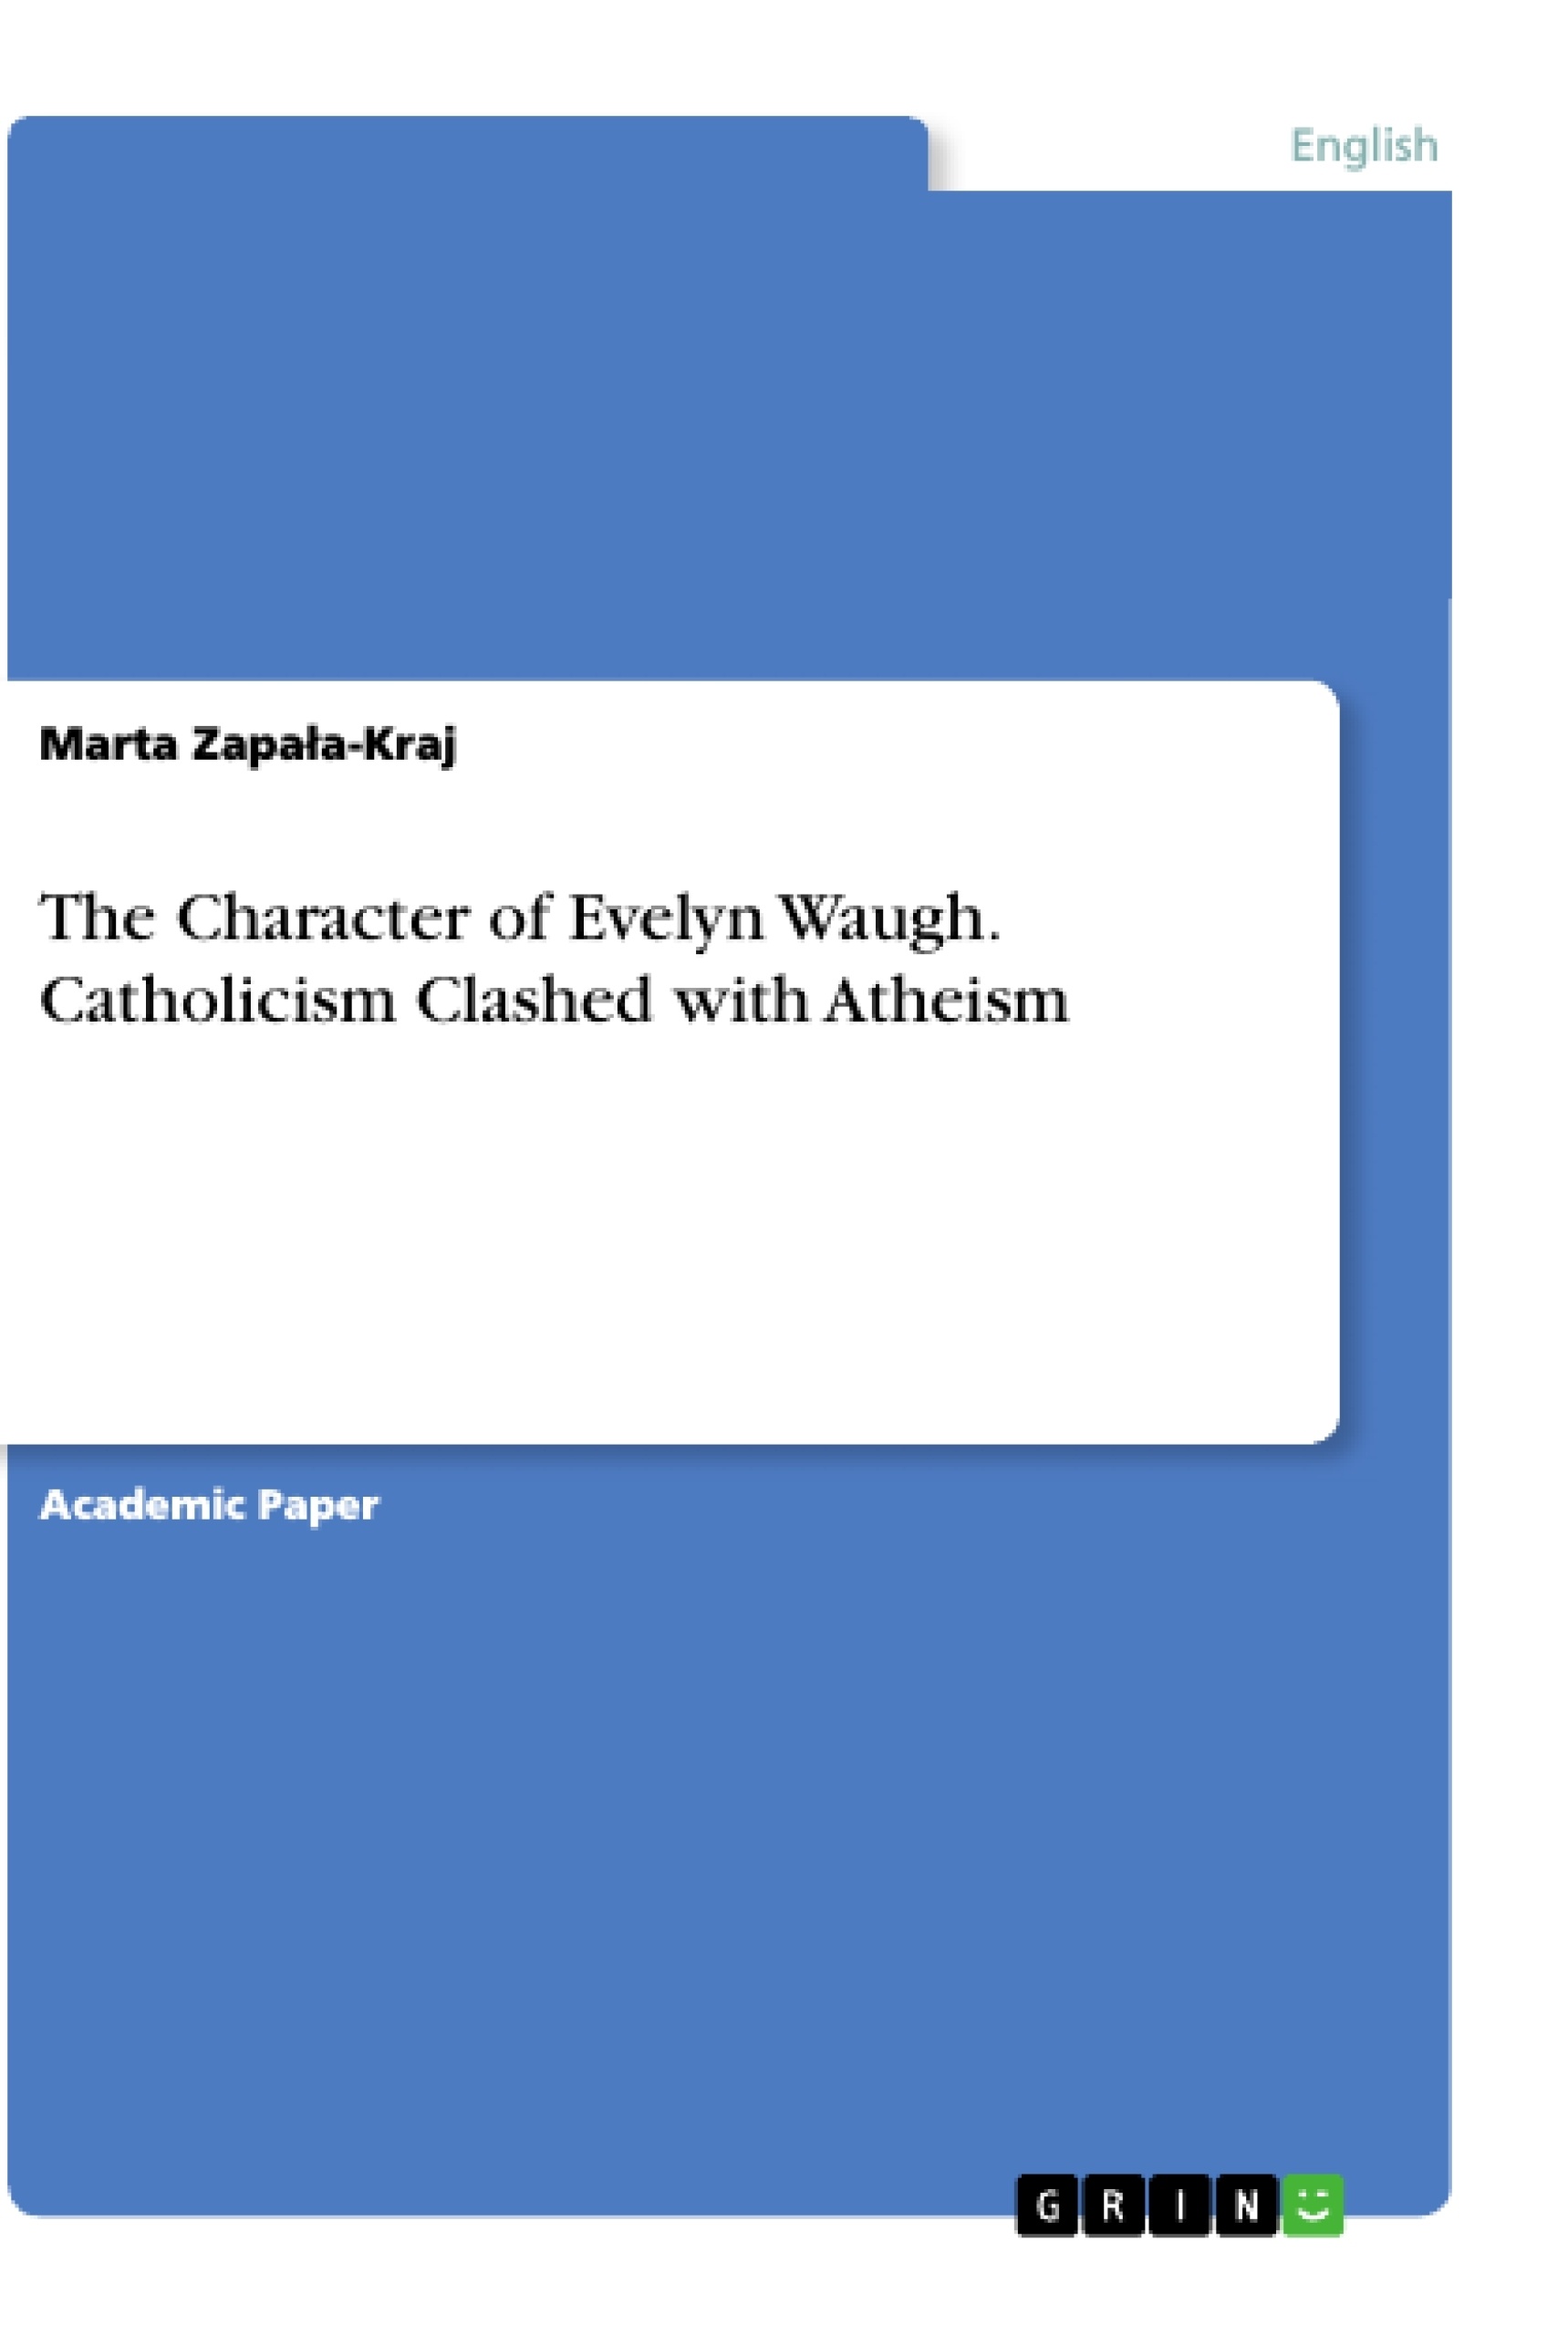 Titre: The Character of Evelyn Waugh. Catholicism Clashed with Atheism